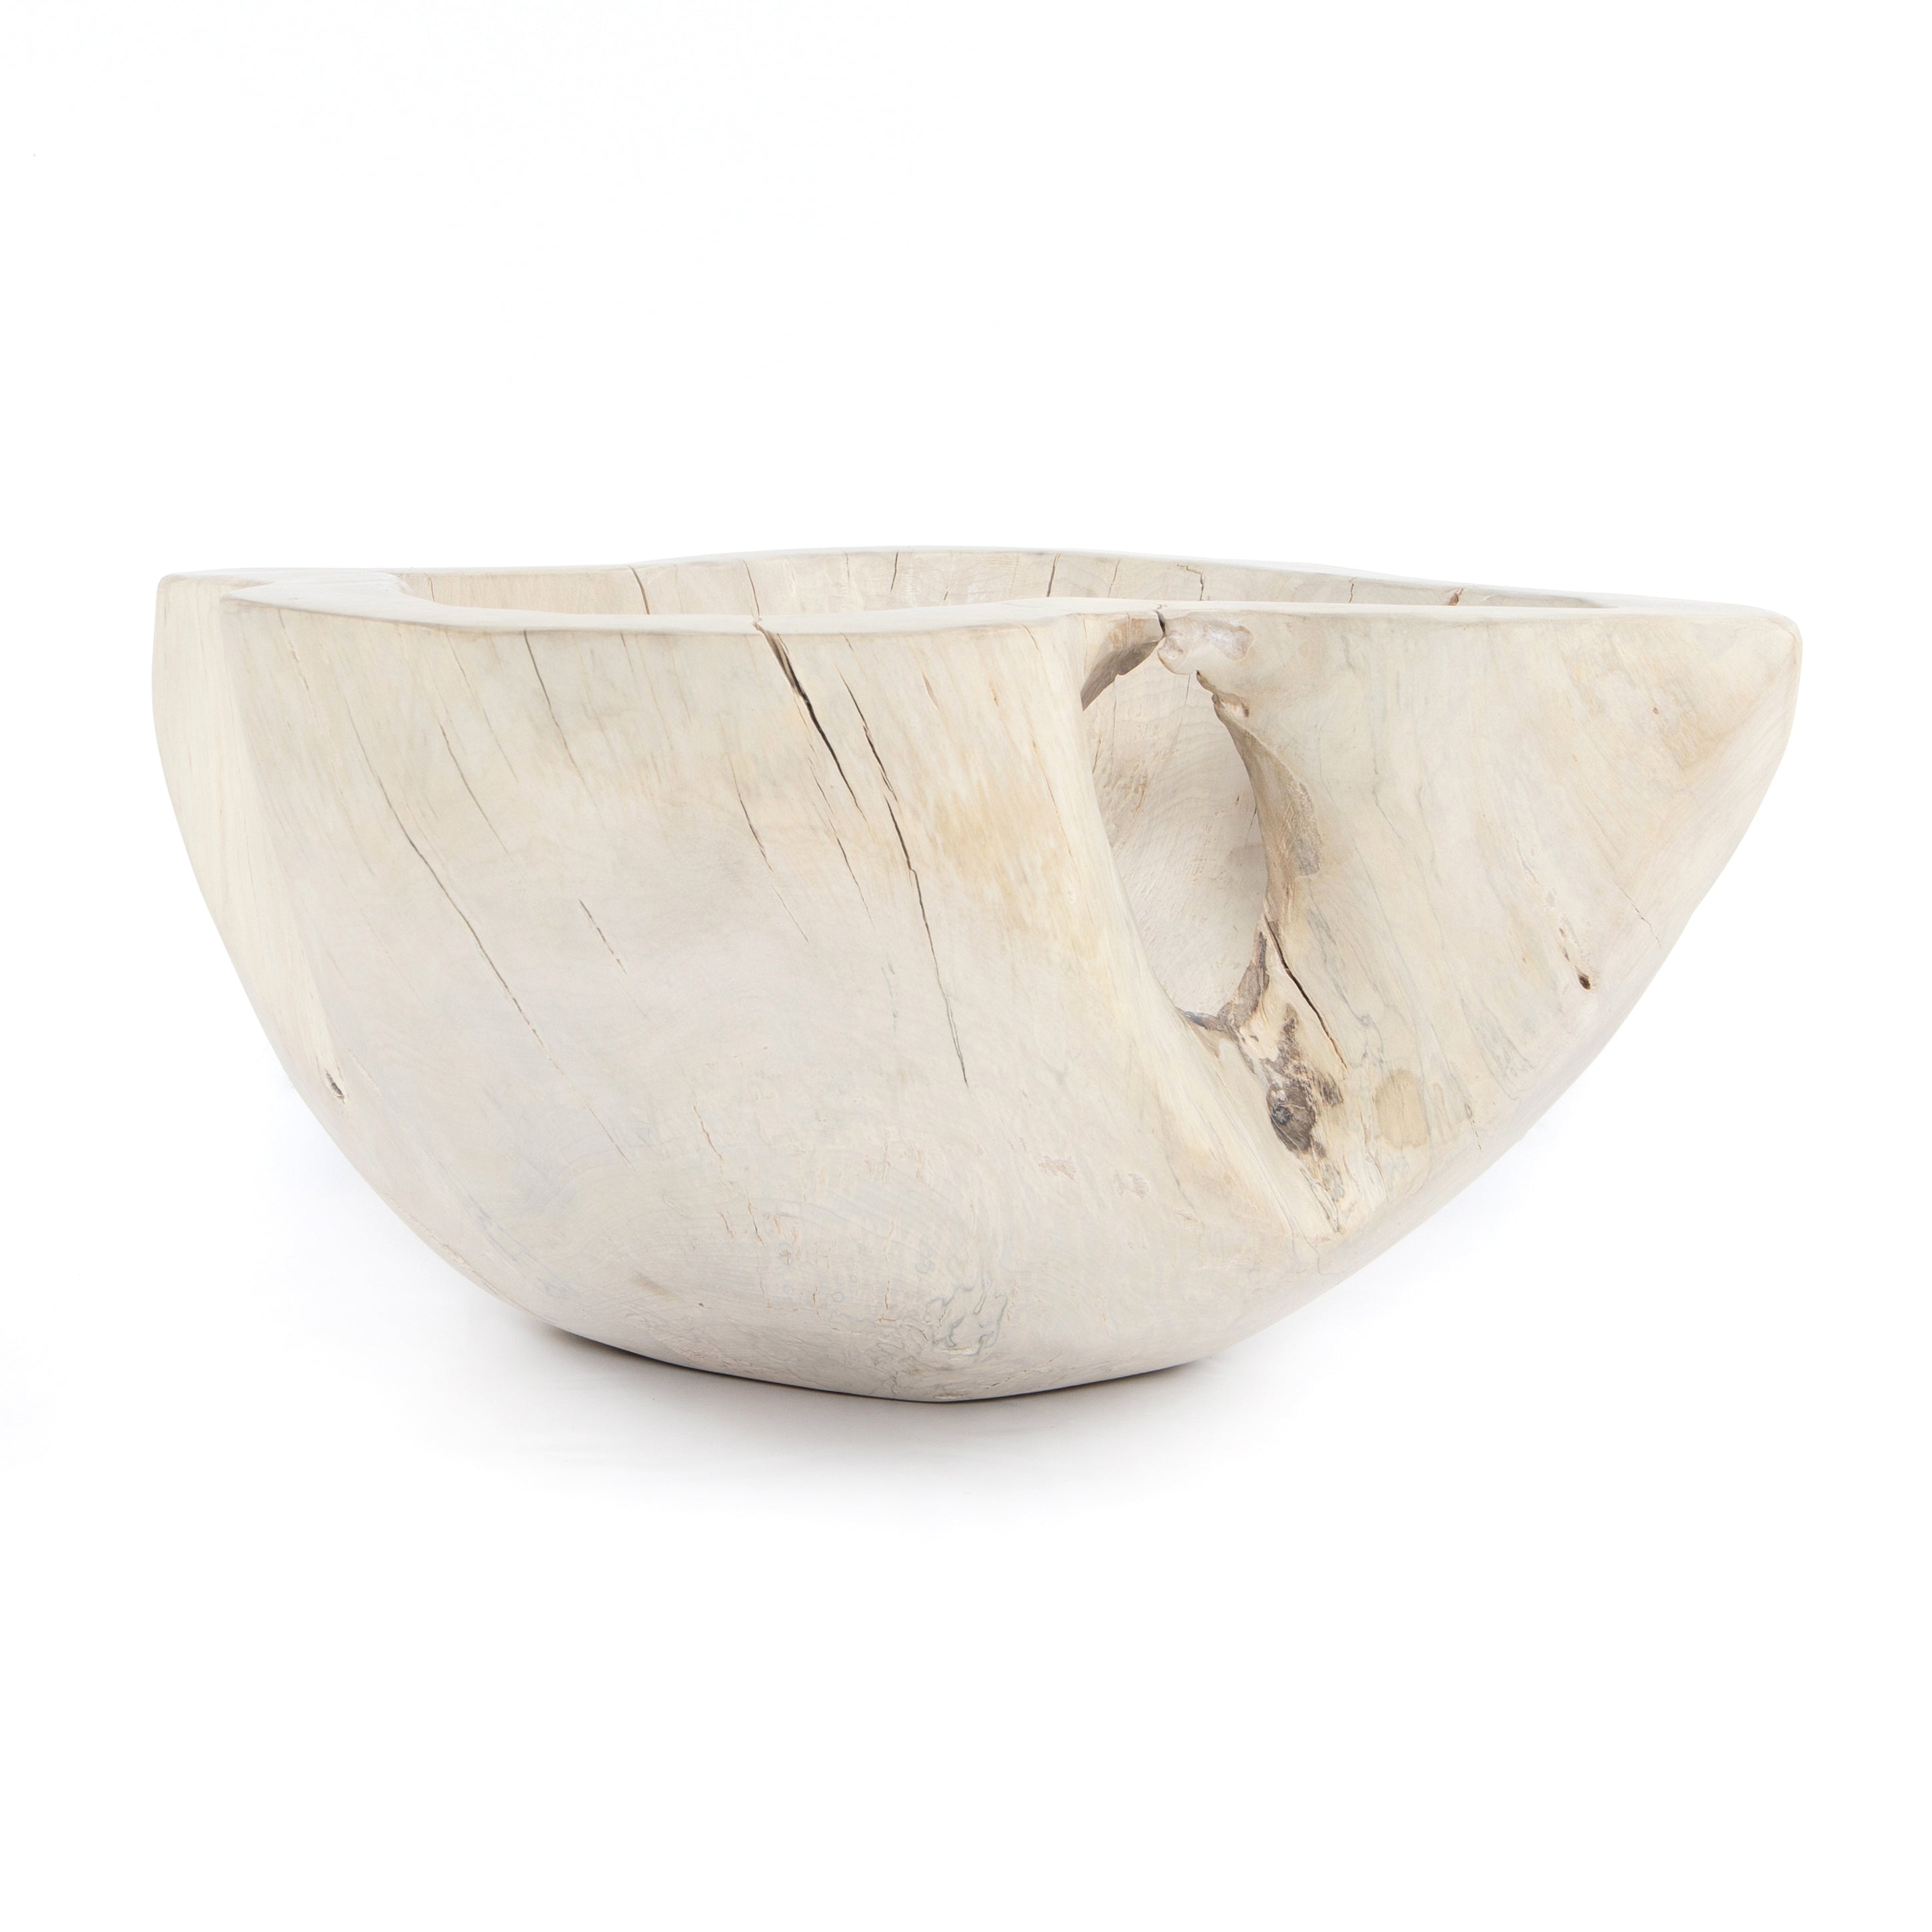 Made from solid reclaimed wood, this Live Edge Bowl - Ivory brings an earthy element to any living room, kitchen, or other area. Place atop your entryway console or showcase on your favorite shelve, this bowl is sure to catch the eye of any guest.   Amethyst Home celebrates natural materials, which often comes with beautiful imperfections. Each piece is made uniquely for you, please expect some variation and character. We embrace the design approach of Wabi Sabi!  Overall Dimensions: 16.00"w x 16.00"d x 11.